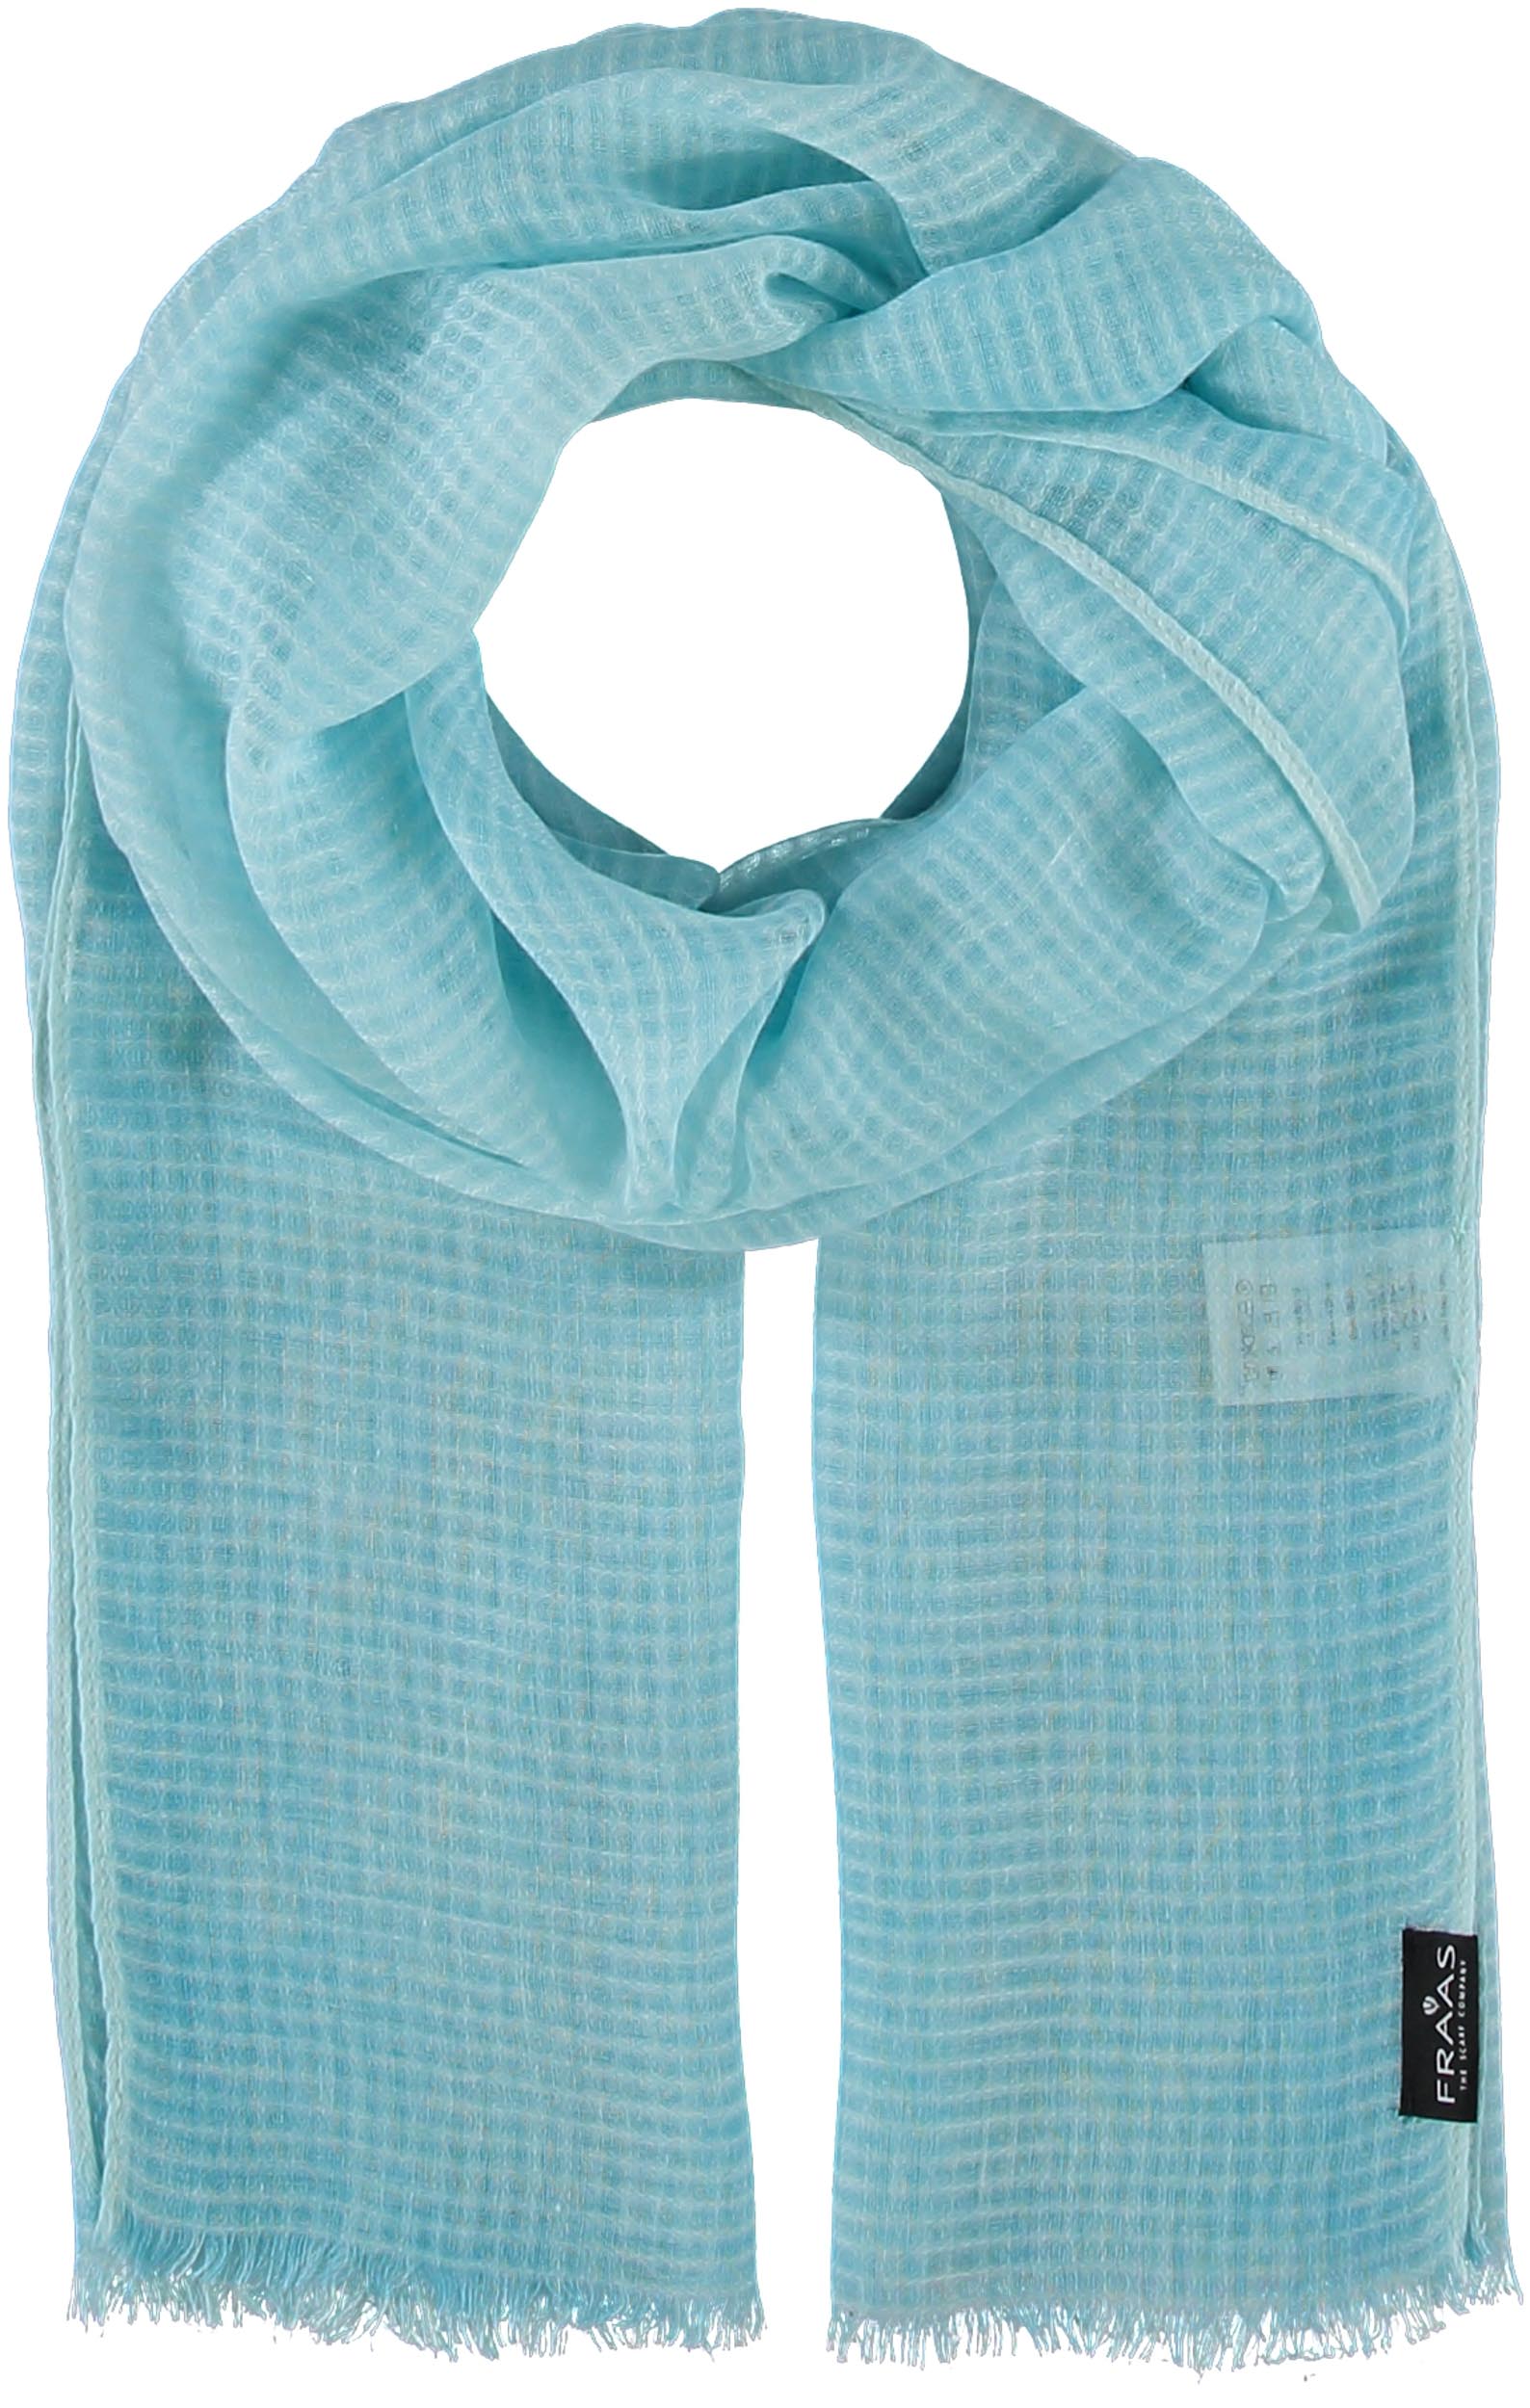 FRAAS Tonal Grid Solid Woven Scarf Wrap.